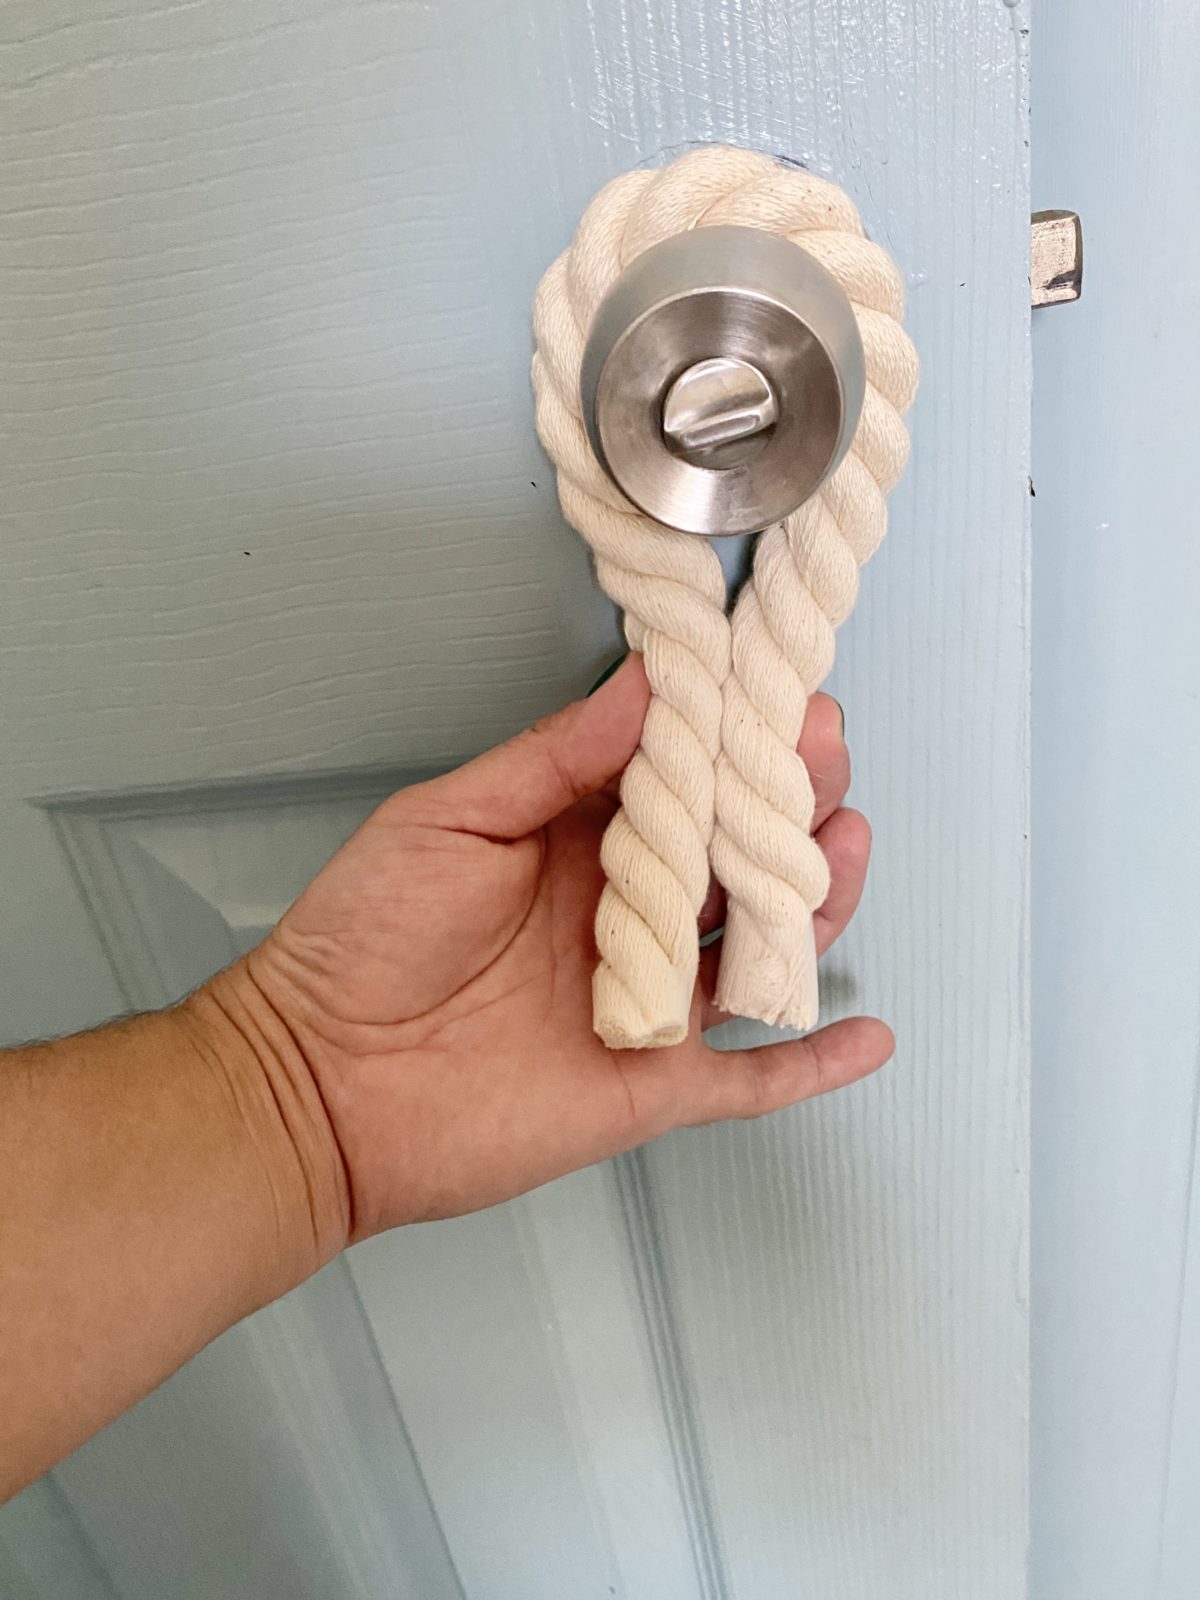 twisted-cotton-cording-for-a-door-knob-tassel